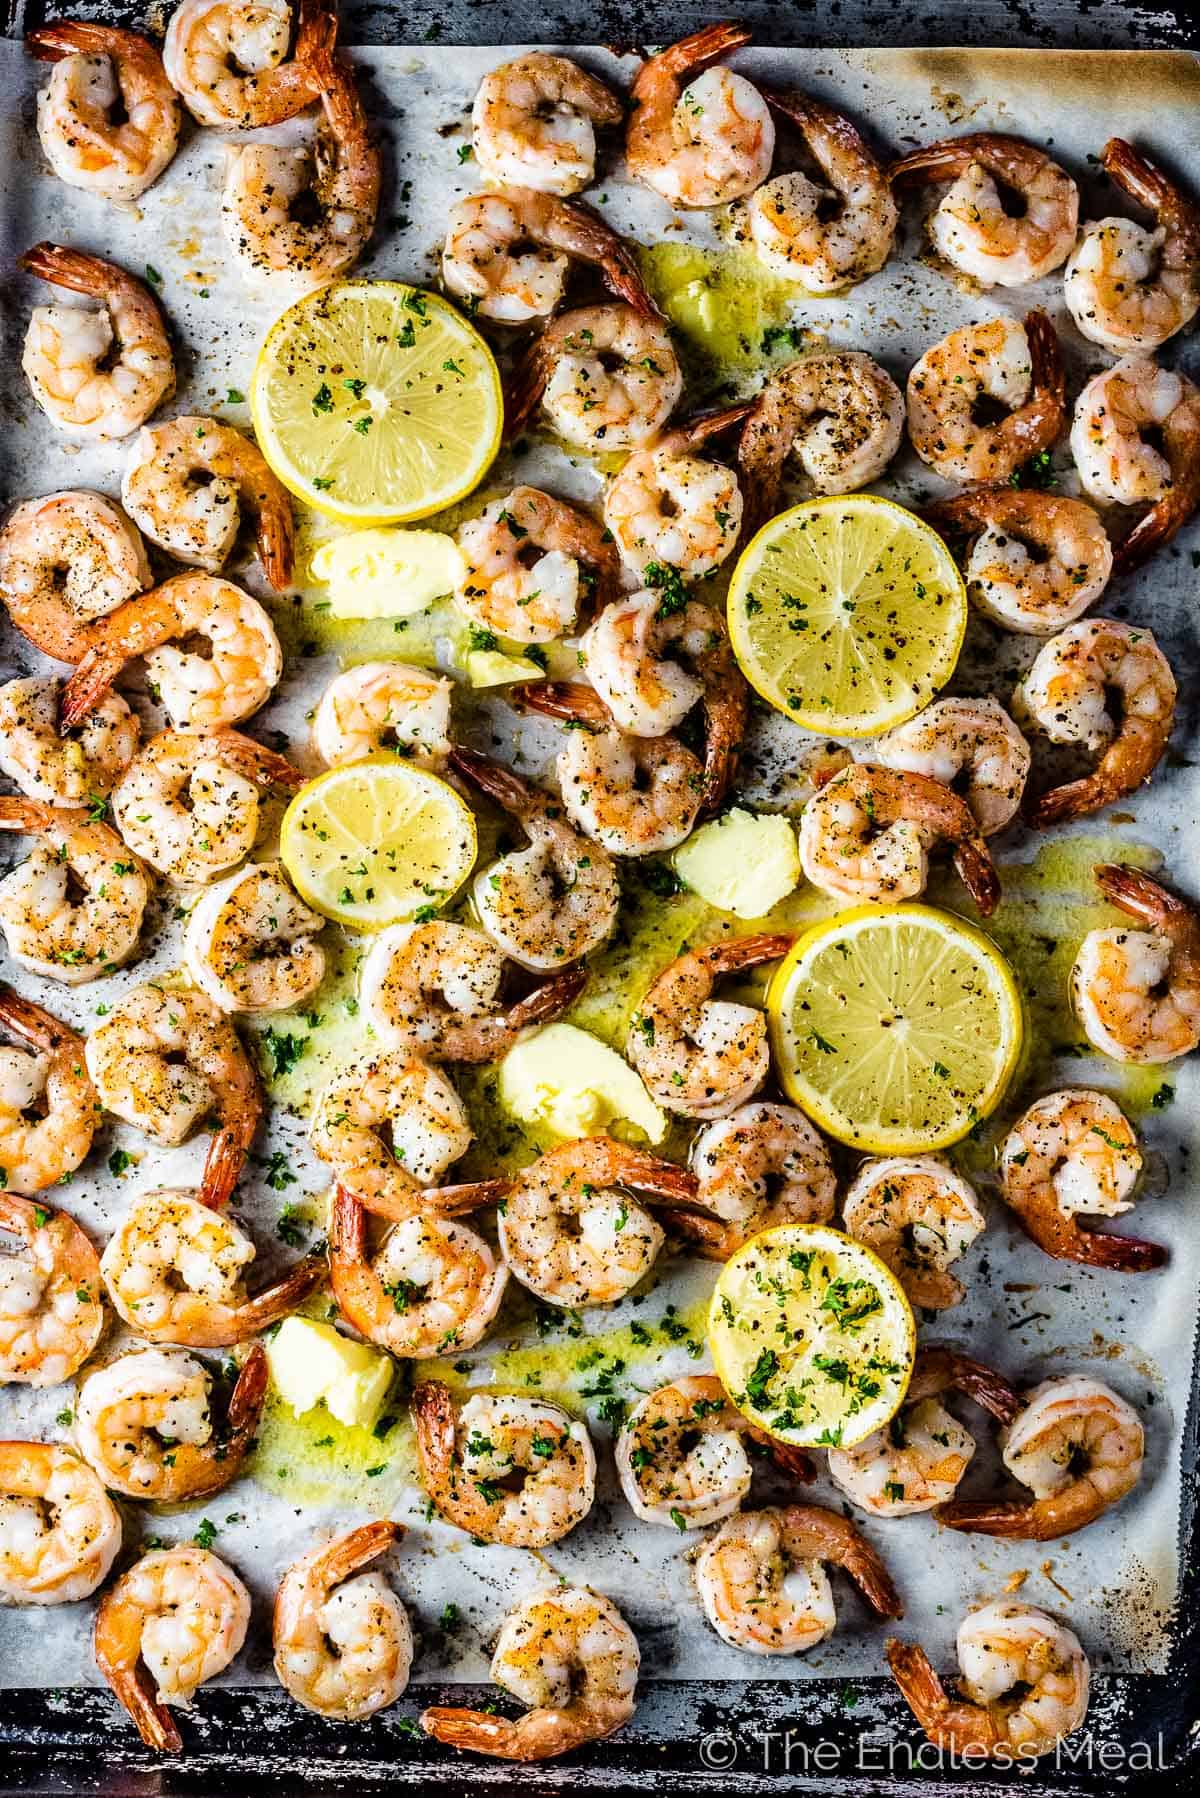 A tray of baked shrimp with slices of lemon.